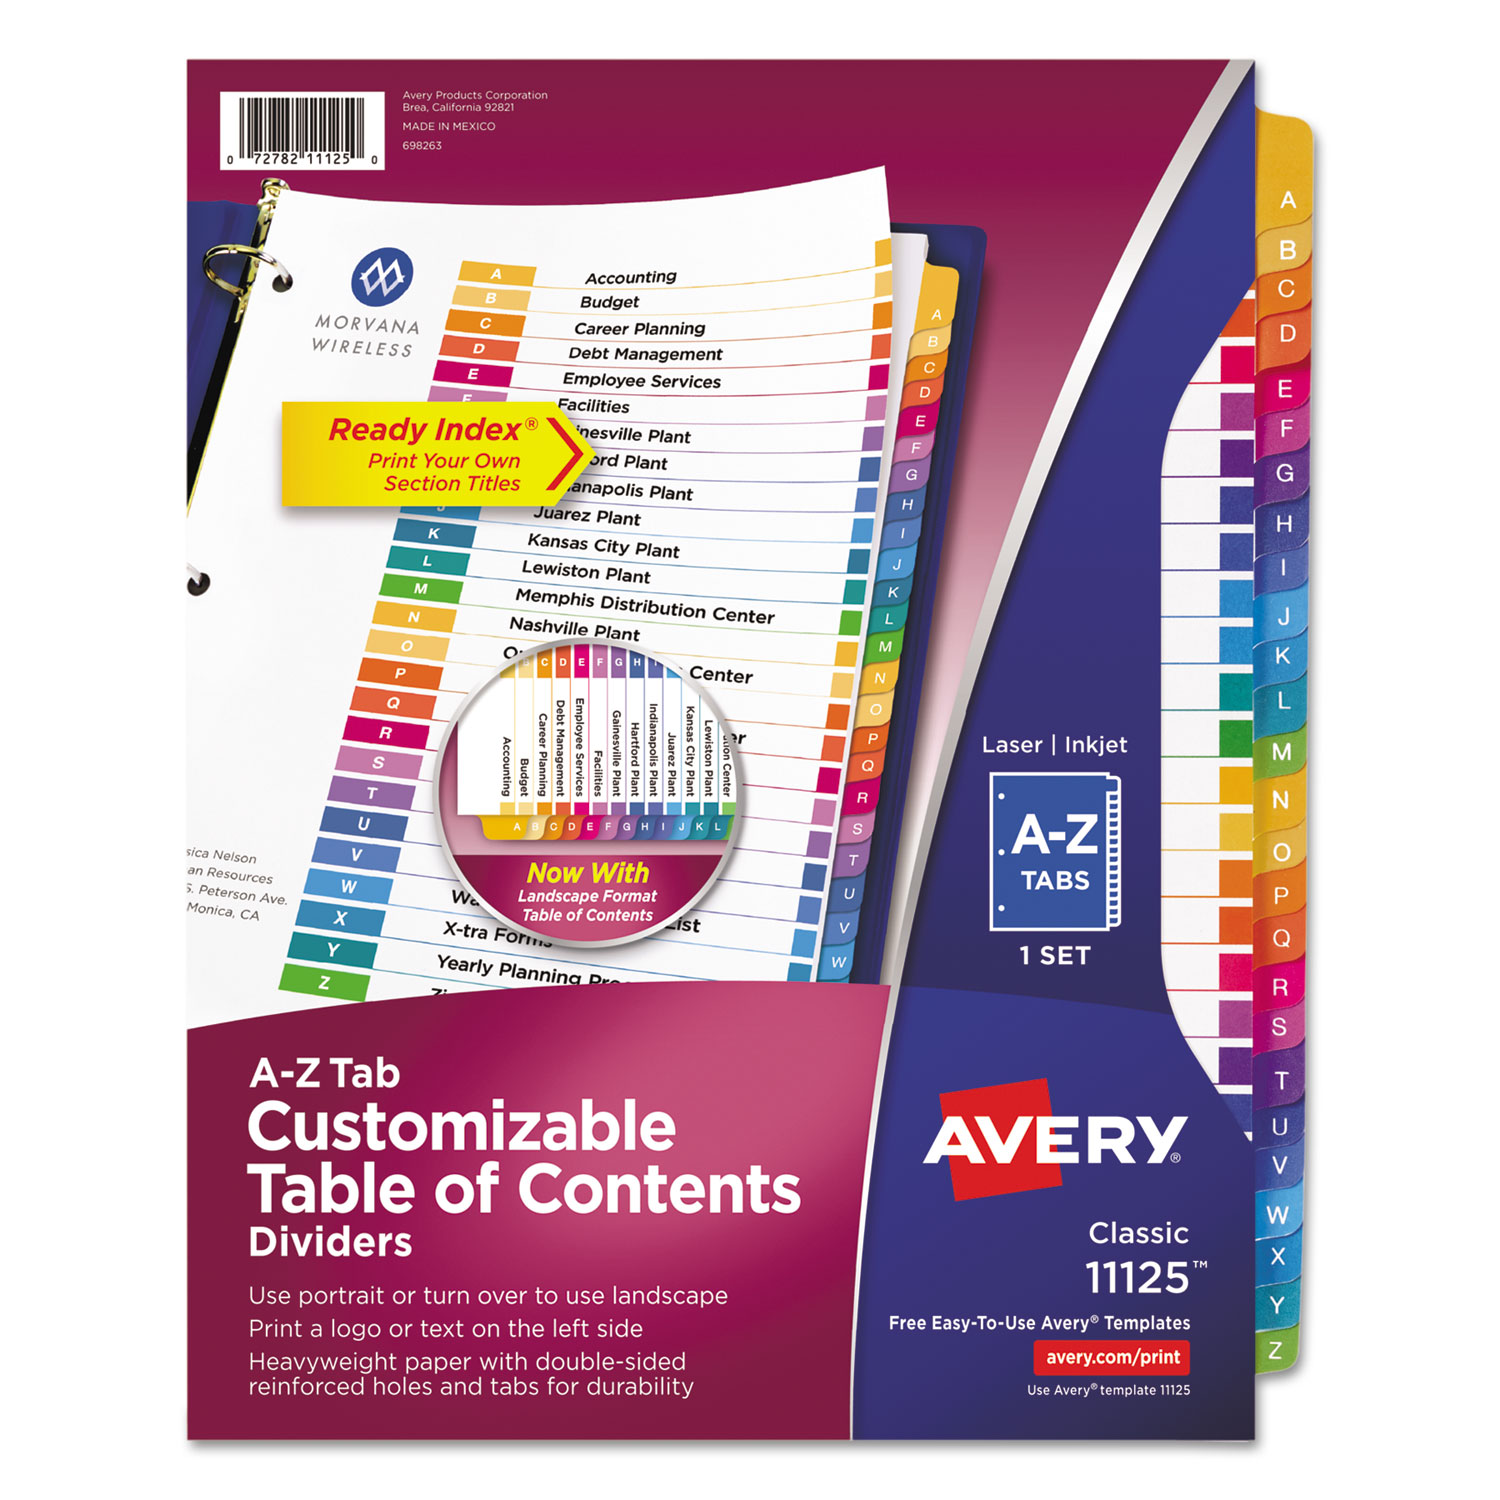 Avery Dennison Ave-11125 Ready Index Table Of Contents Reference for sale online 